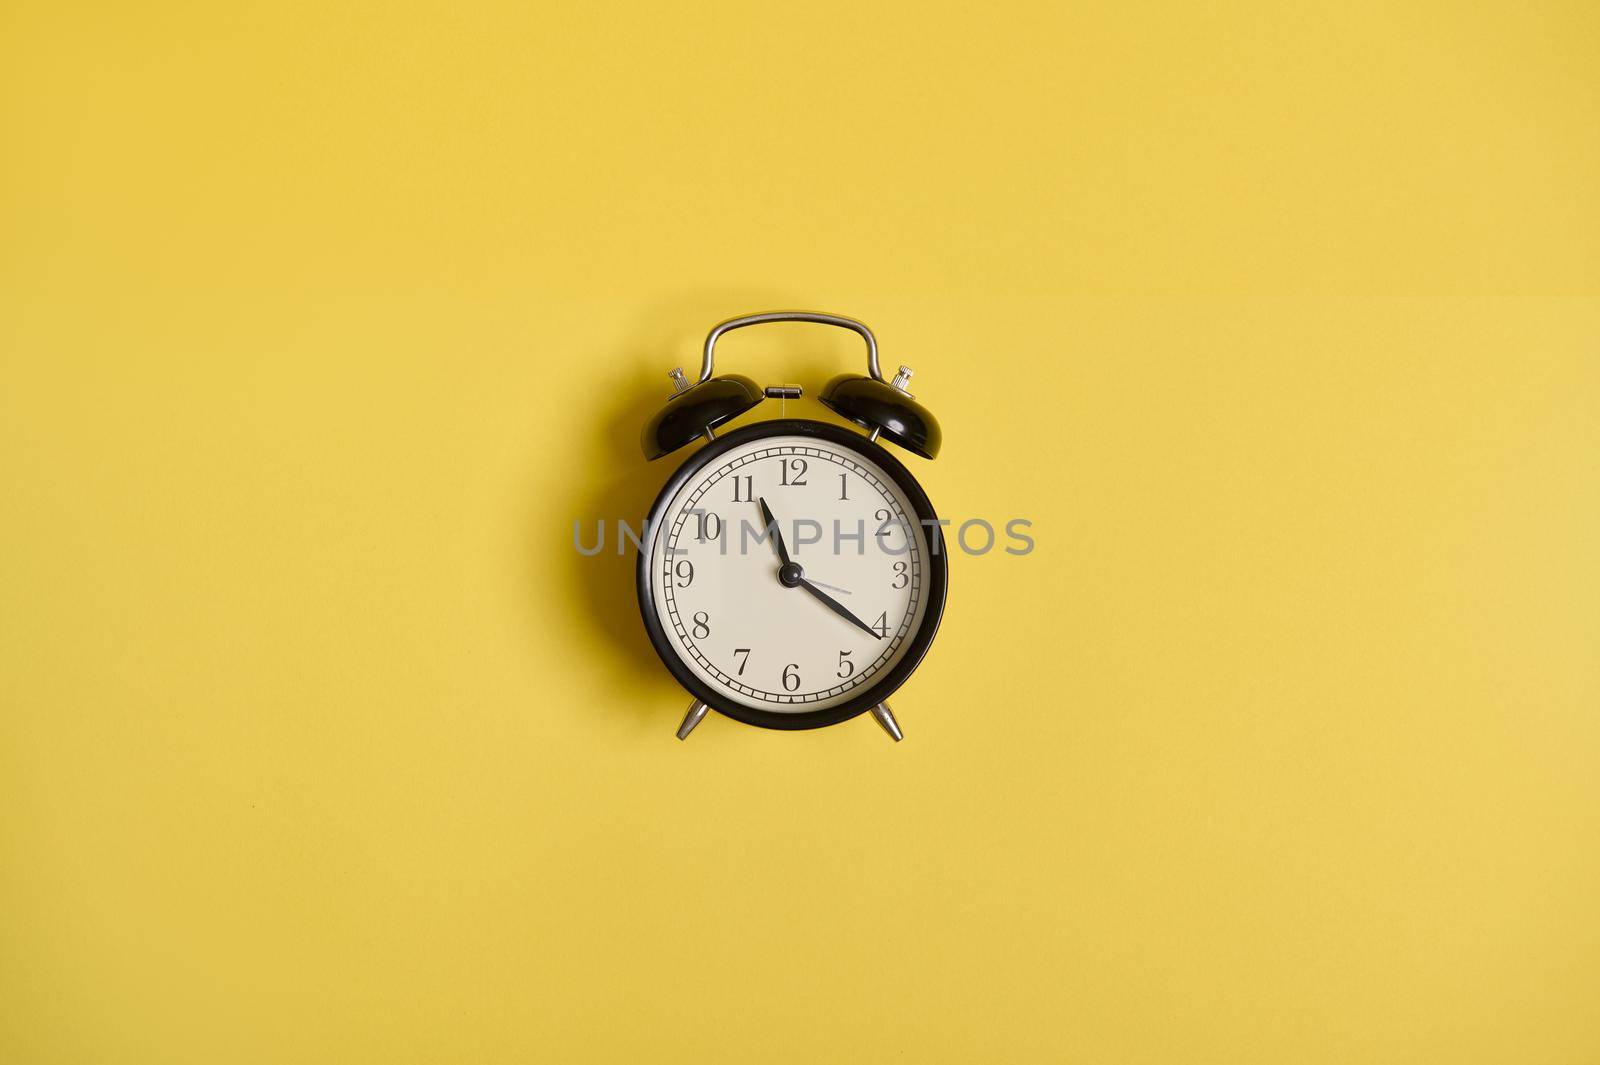 Flat lay of an alarm clock, on yellow background with space for text. Concept of checking time, time management, business and events by artgf